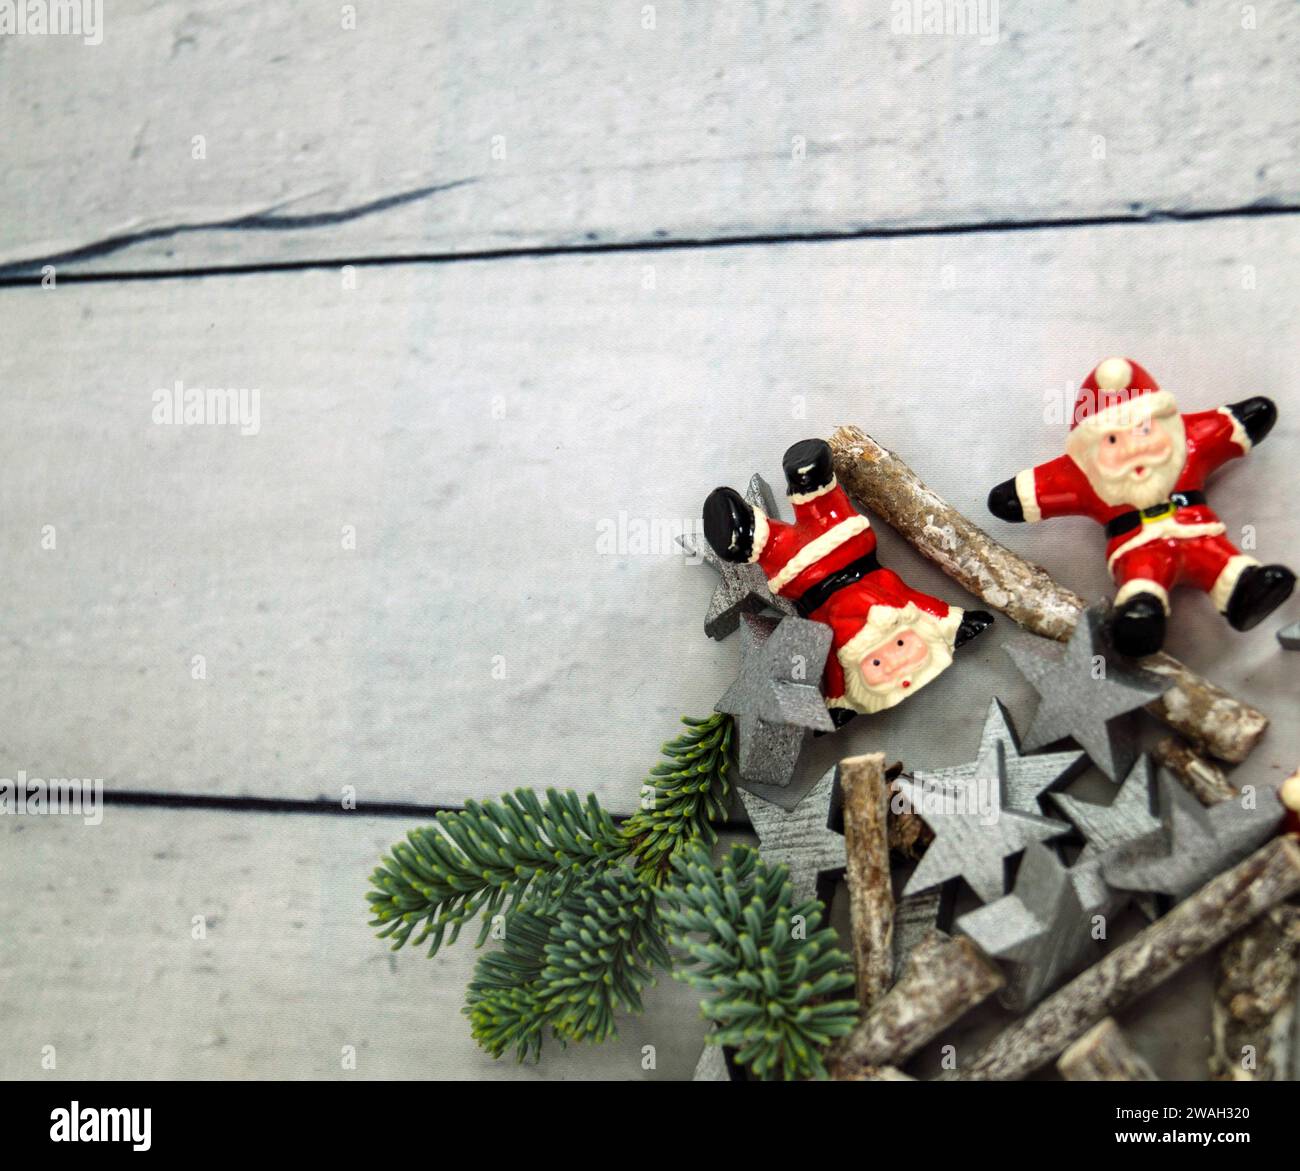 Christmas decorations and Santa Claus figures Stock Photo